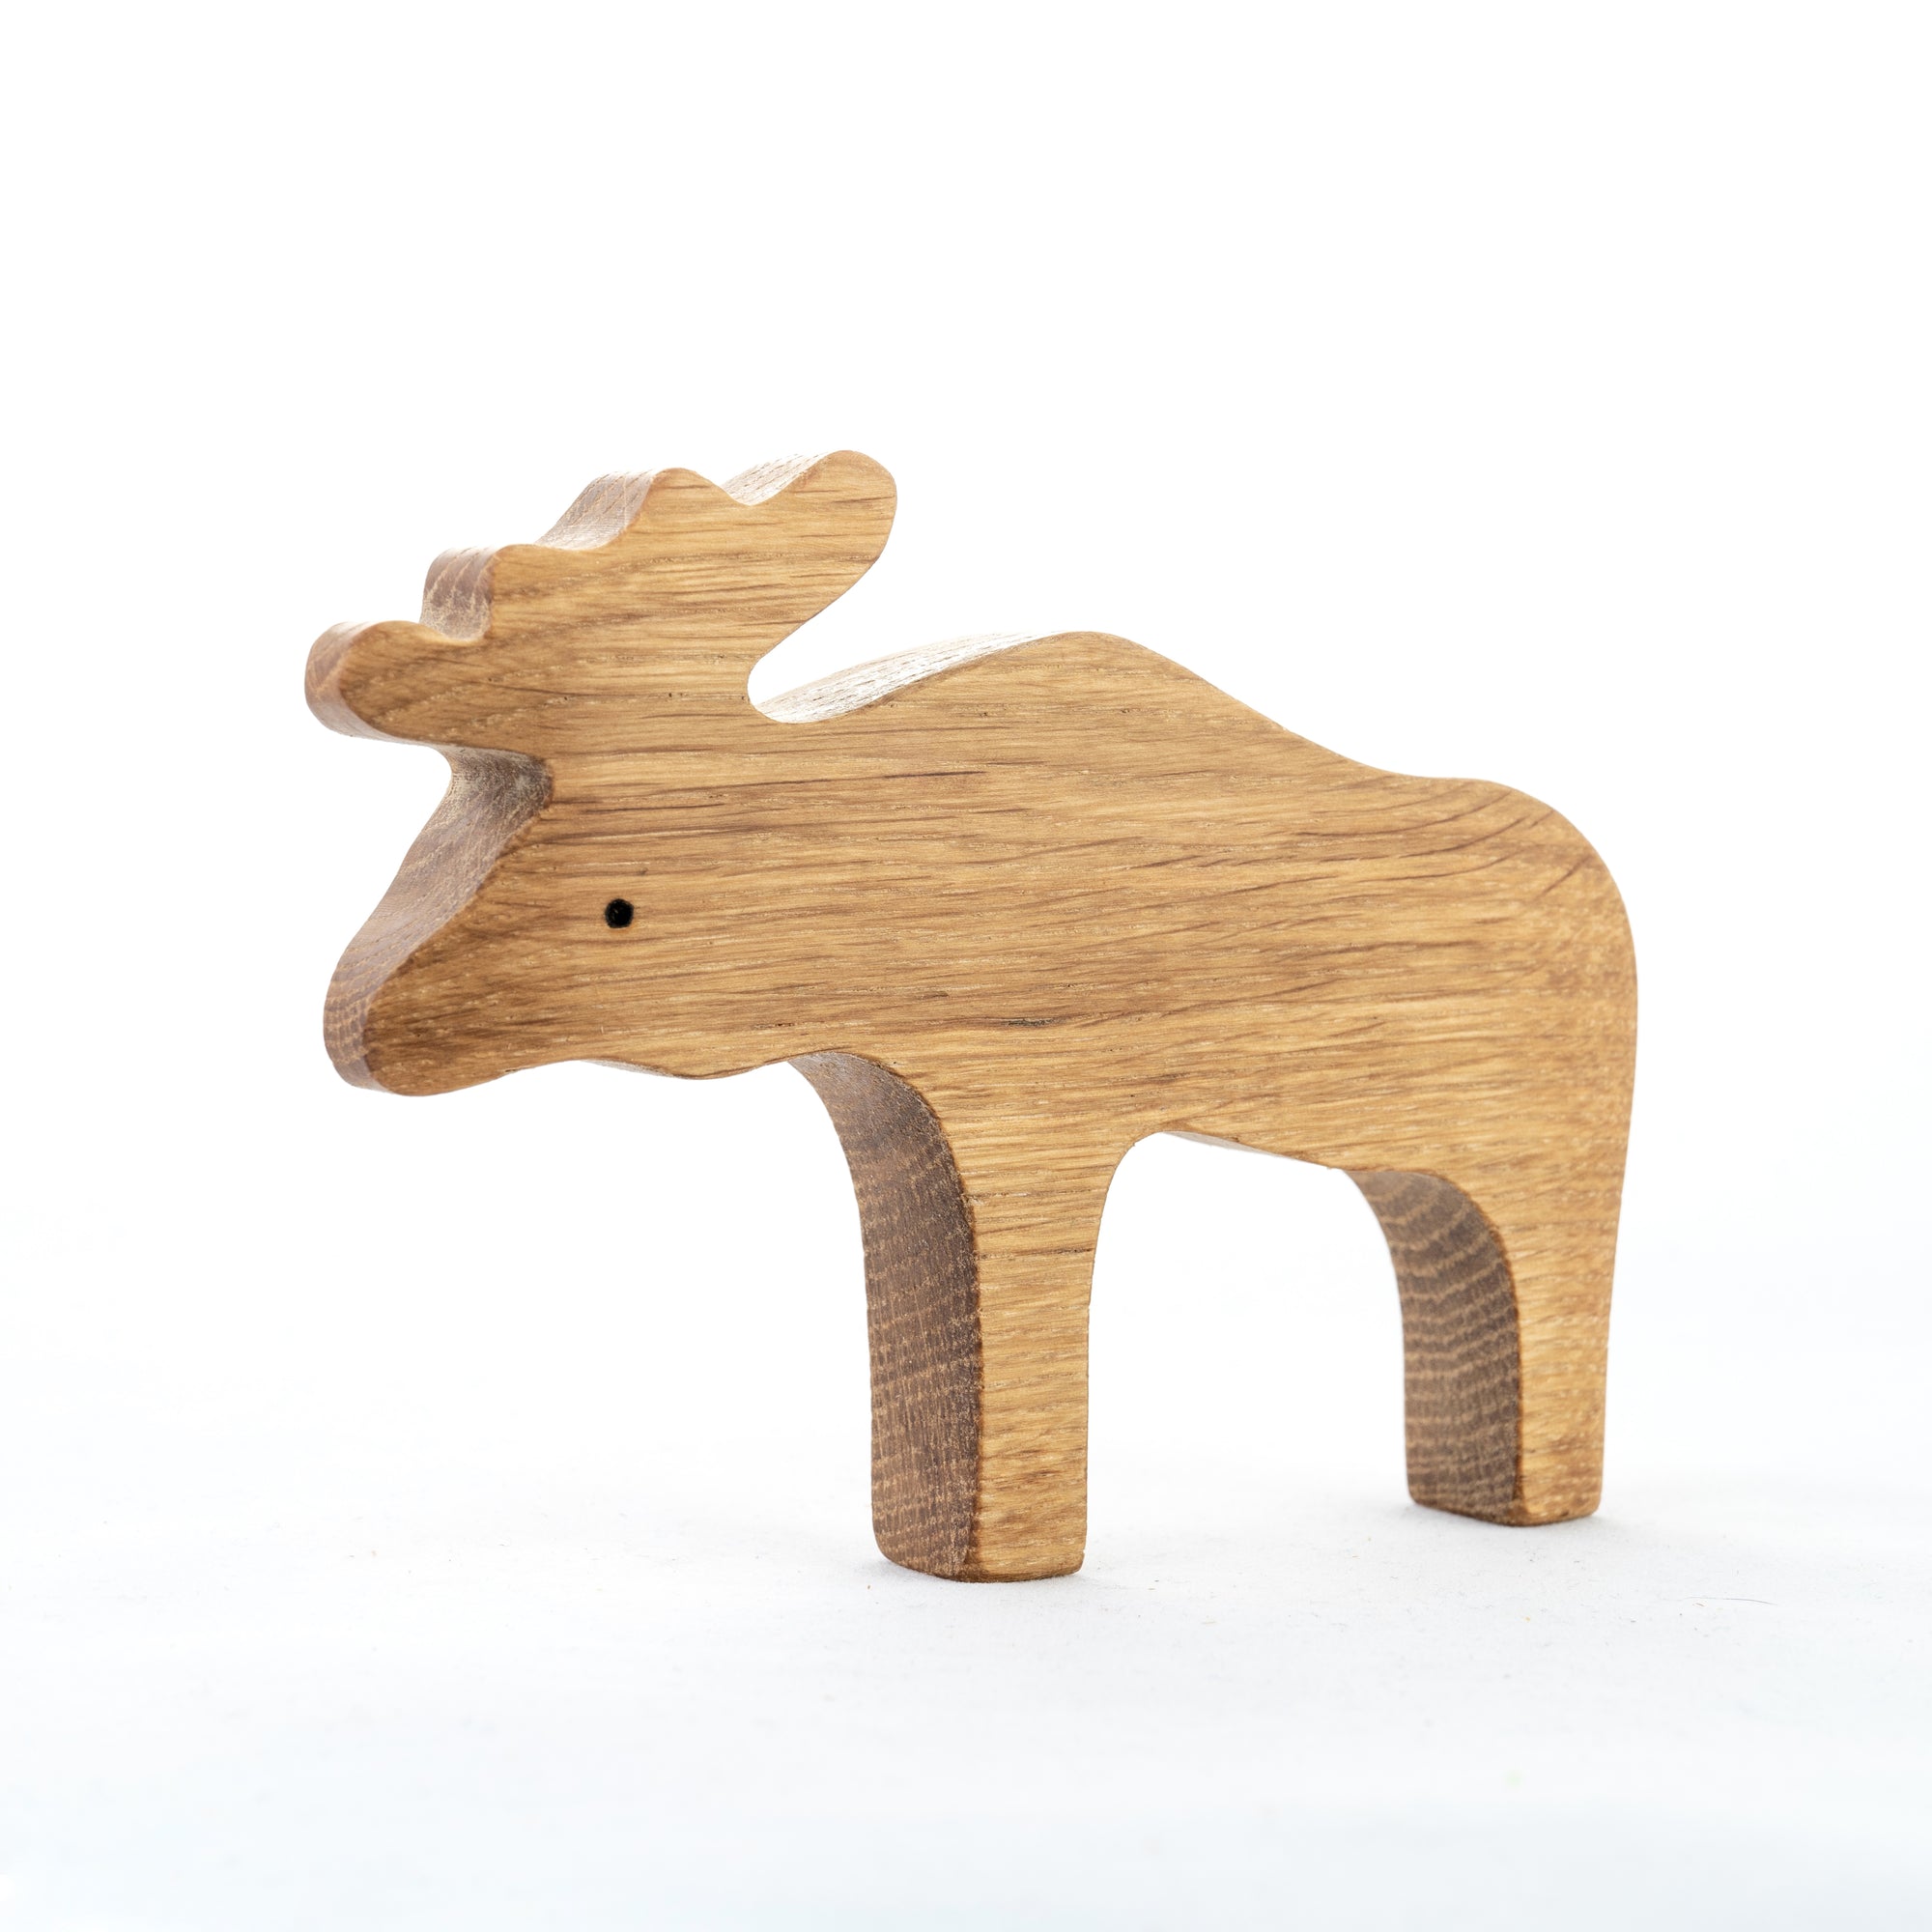 Wooden Animal Toys  Natural Wooden Animals From Around the World